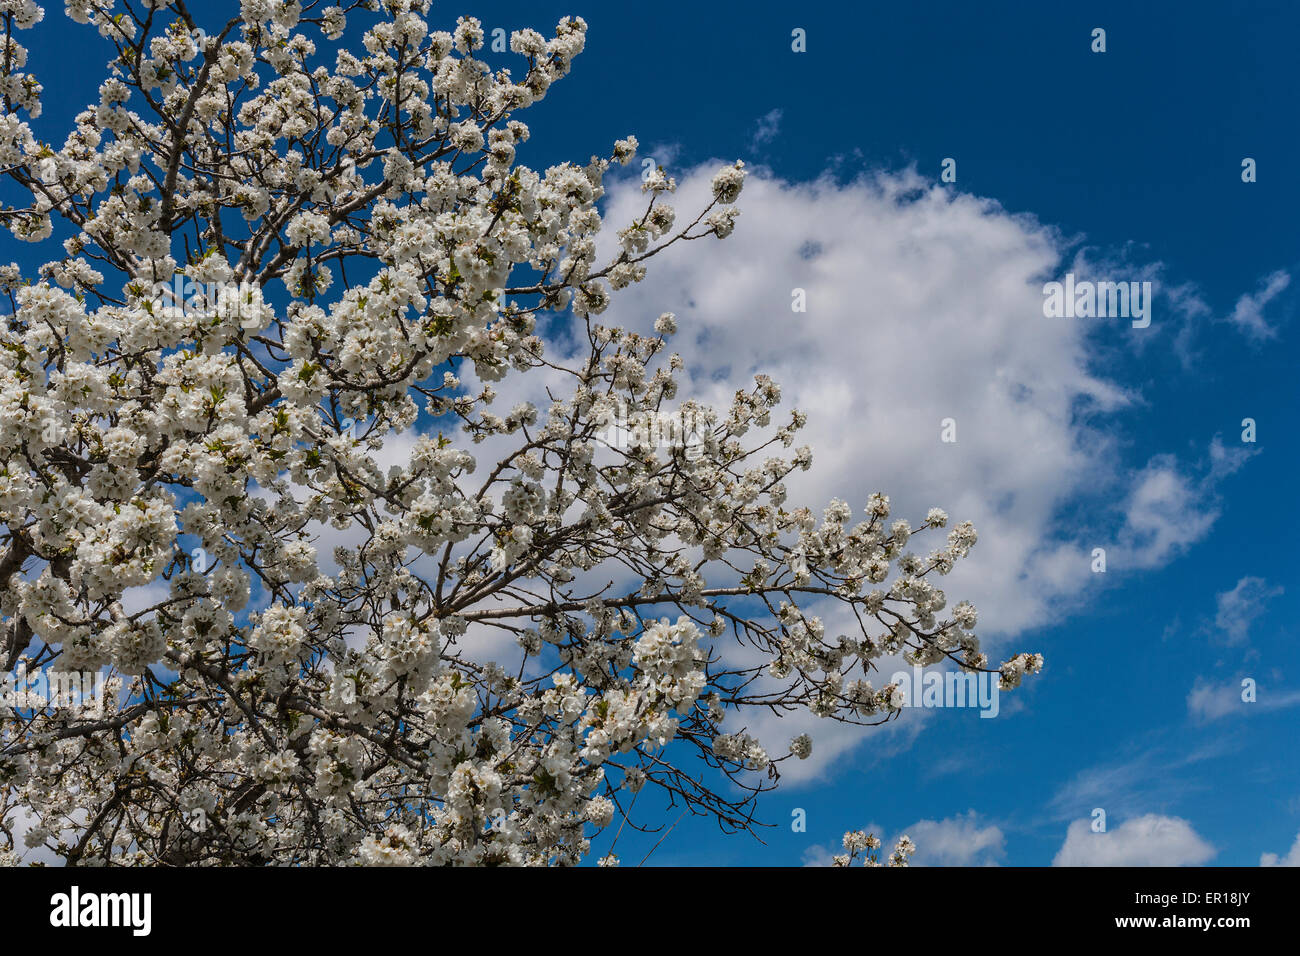 Flowers on a tree in Spring bloom season. Stock Photo